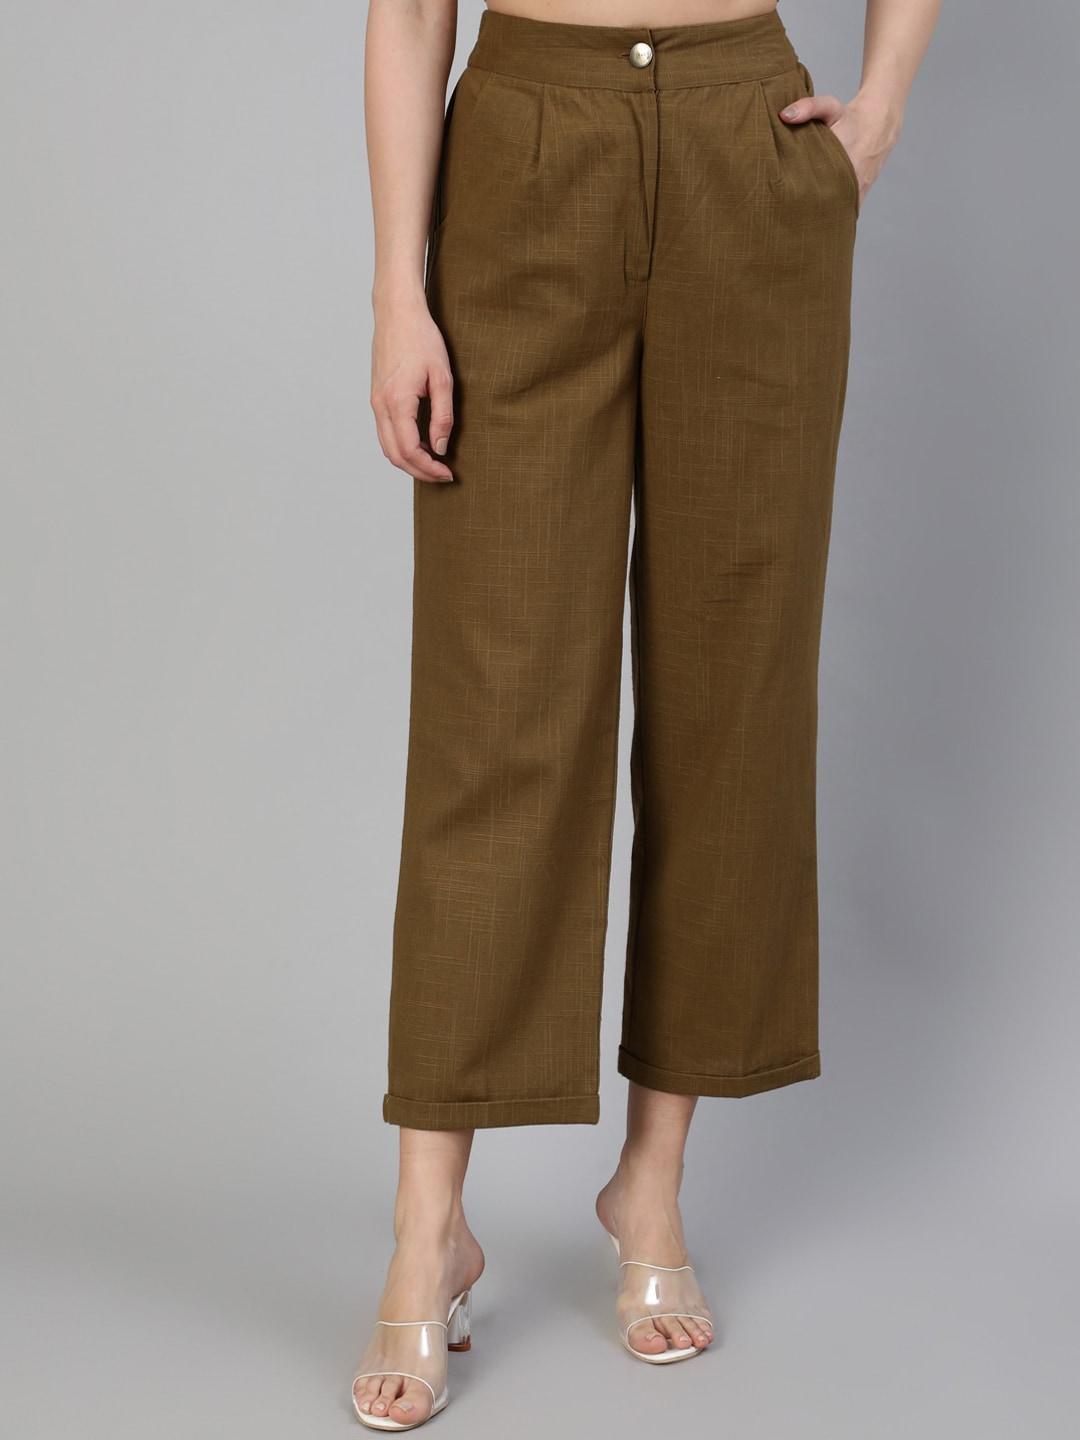 jaipur-kurti-women-olive-green-straight-fit-high-rise-pleated-culottes-trousers